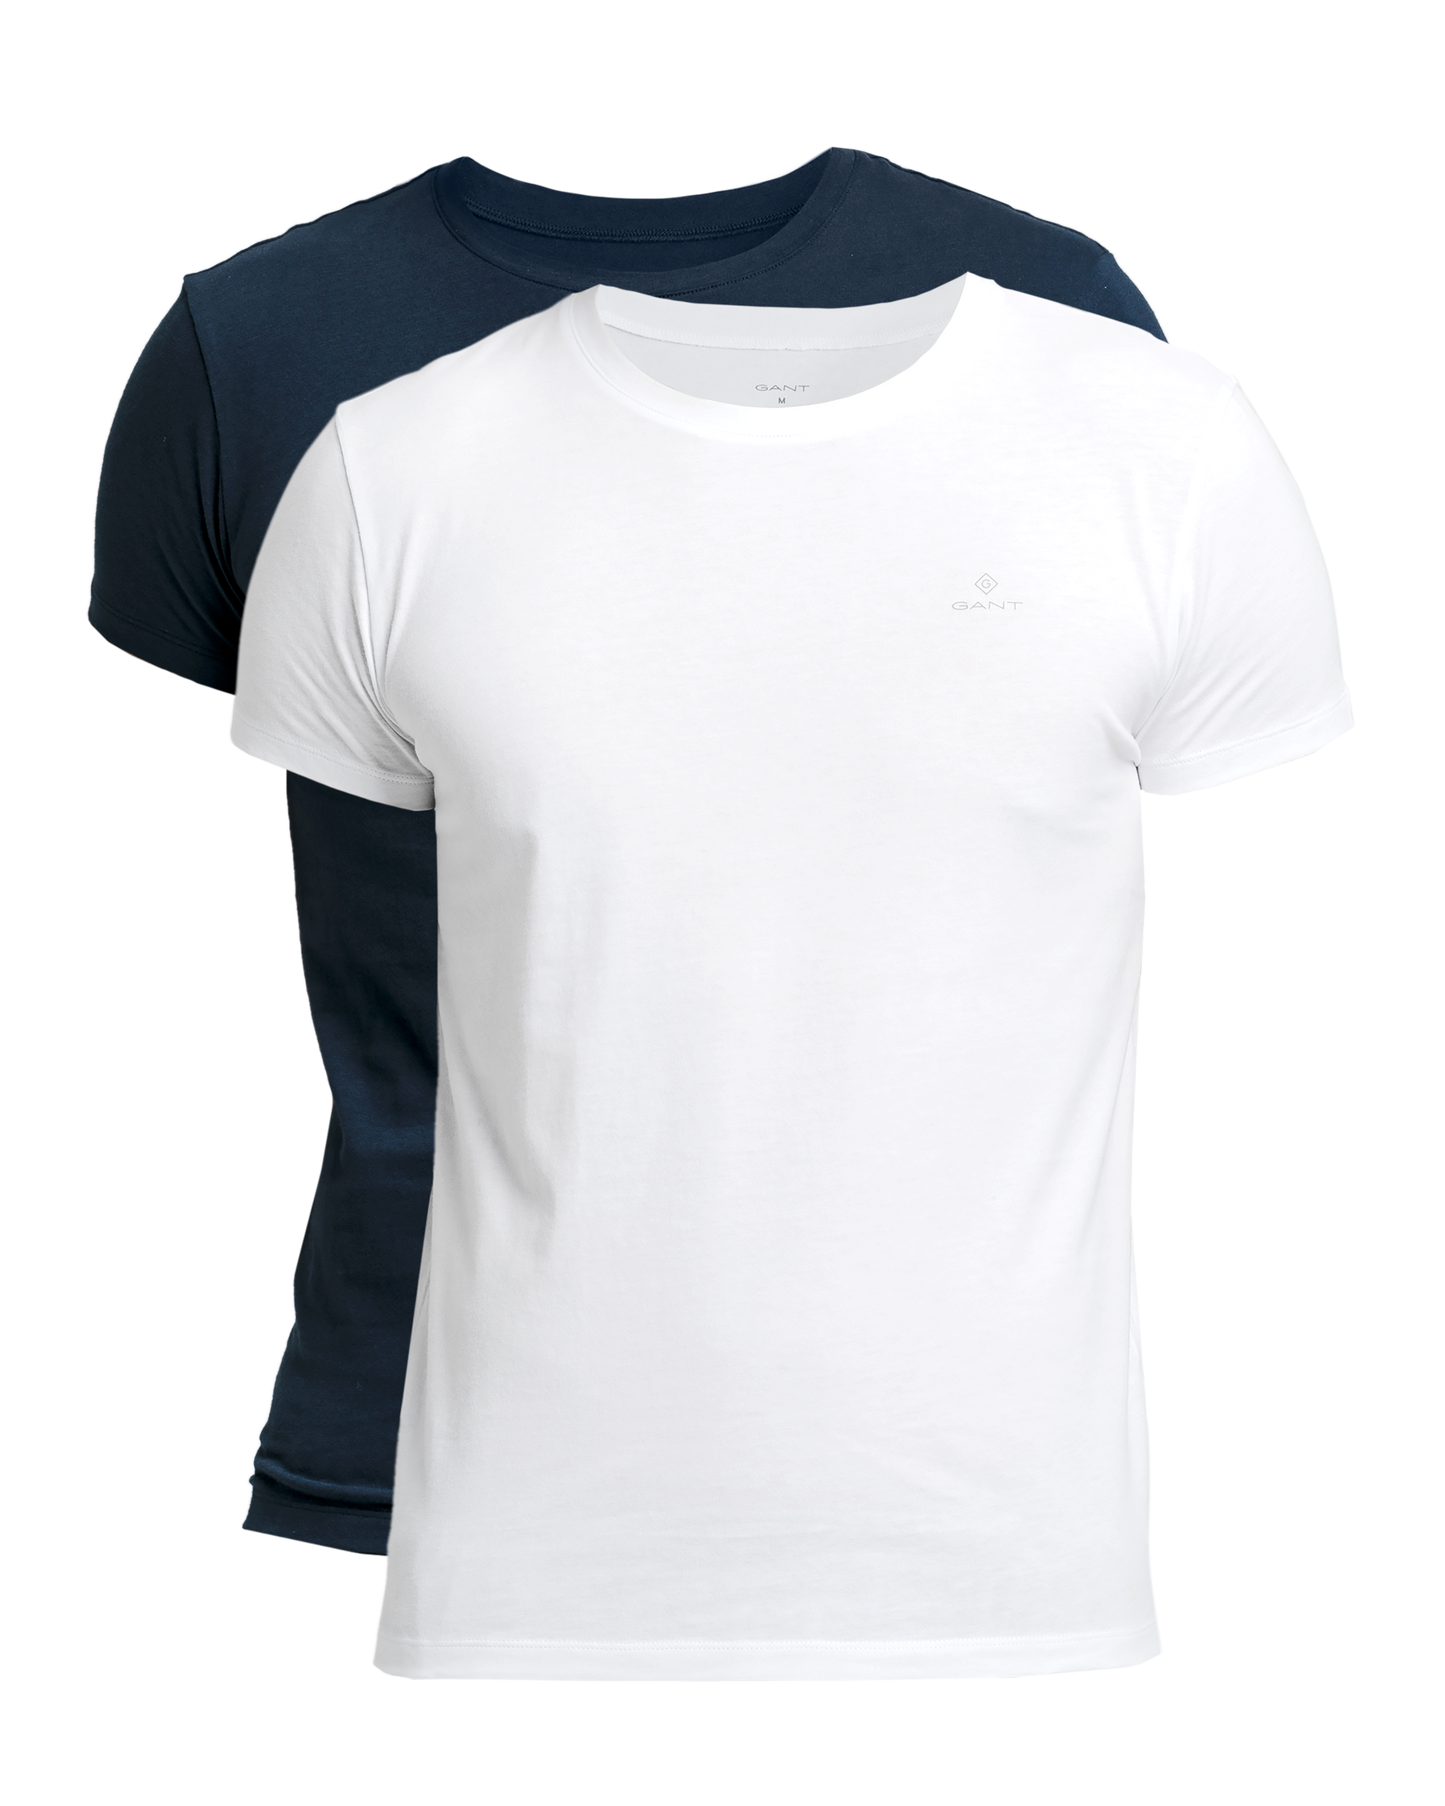 Gant Underwear in regular Classic fit.   The Crew Neck T-Shirt 2-Pack     , chosen in a Navy / White colour